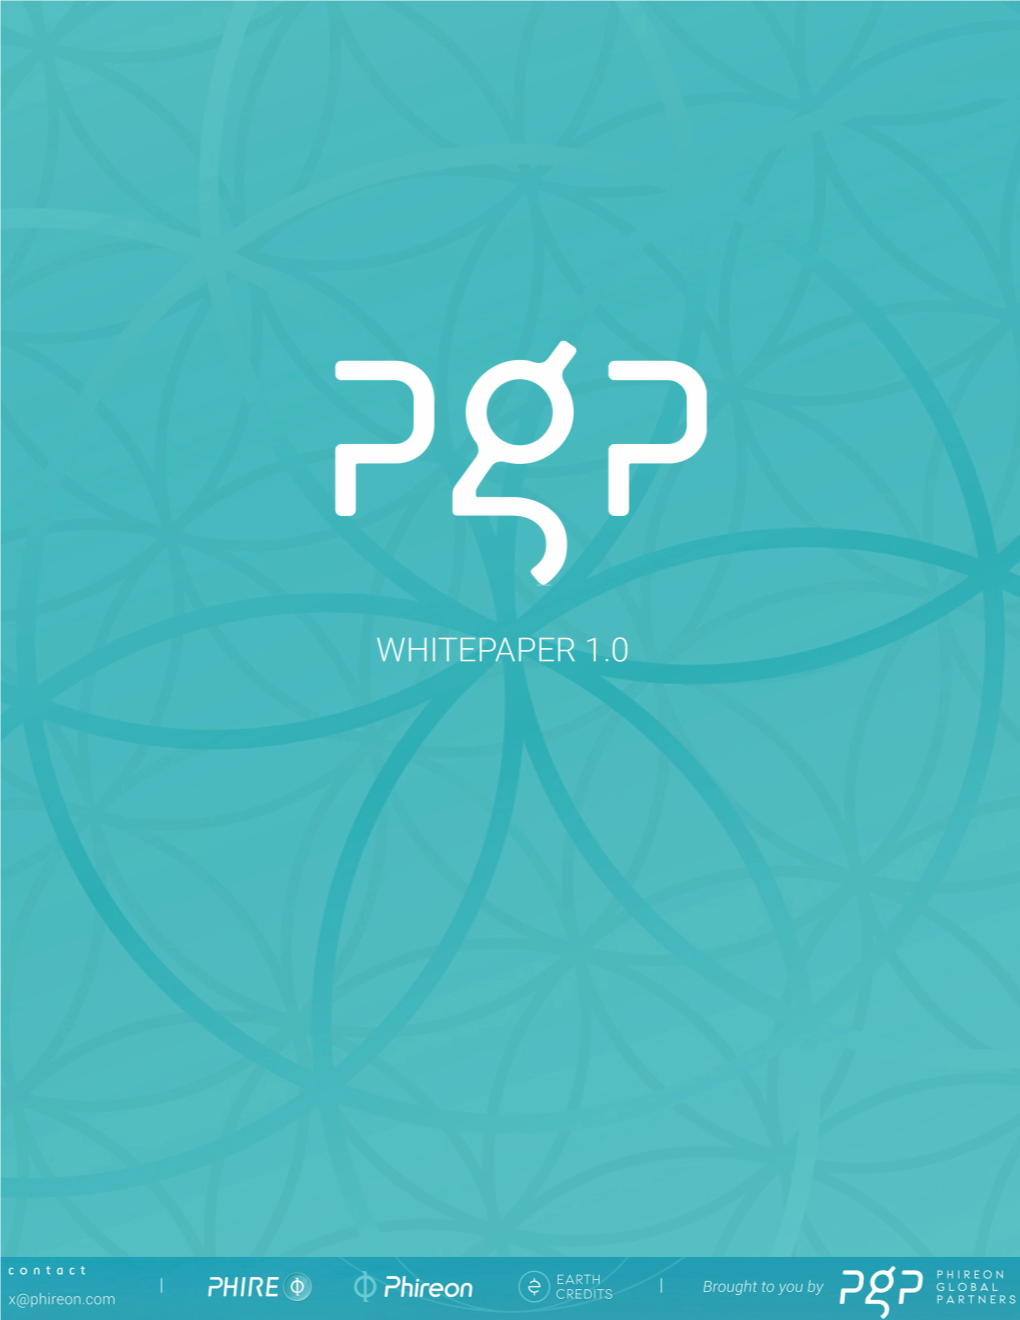 Download the WHITE PAPER